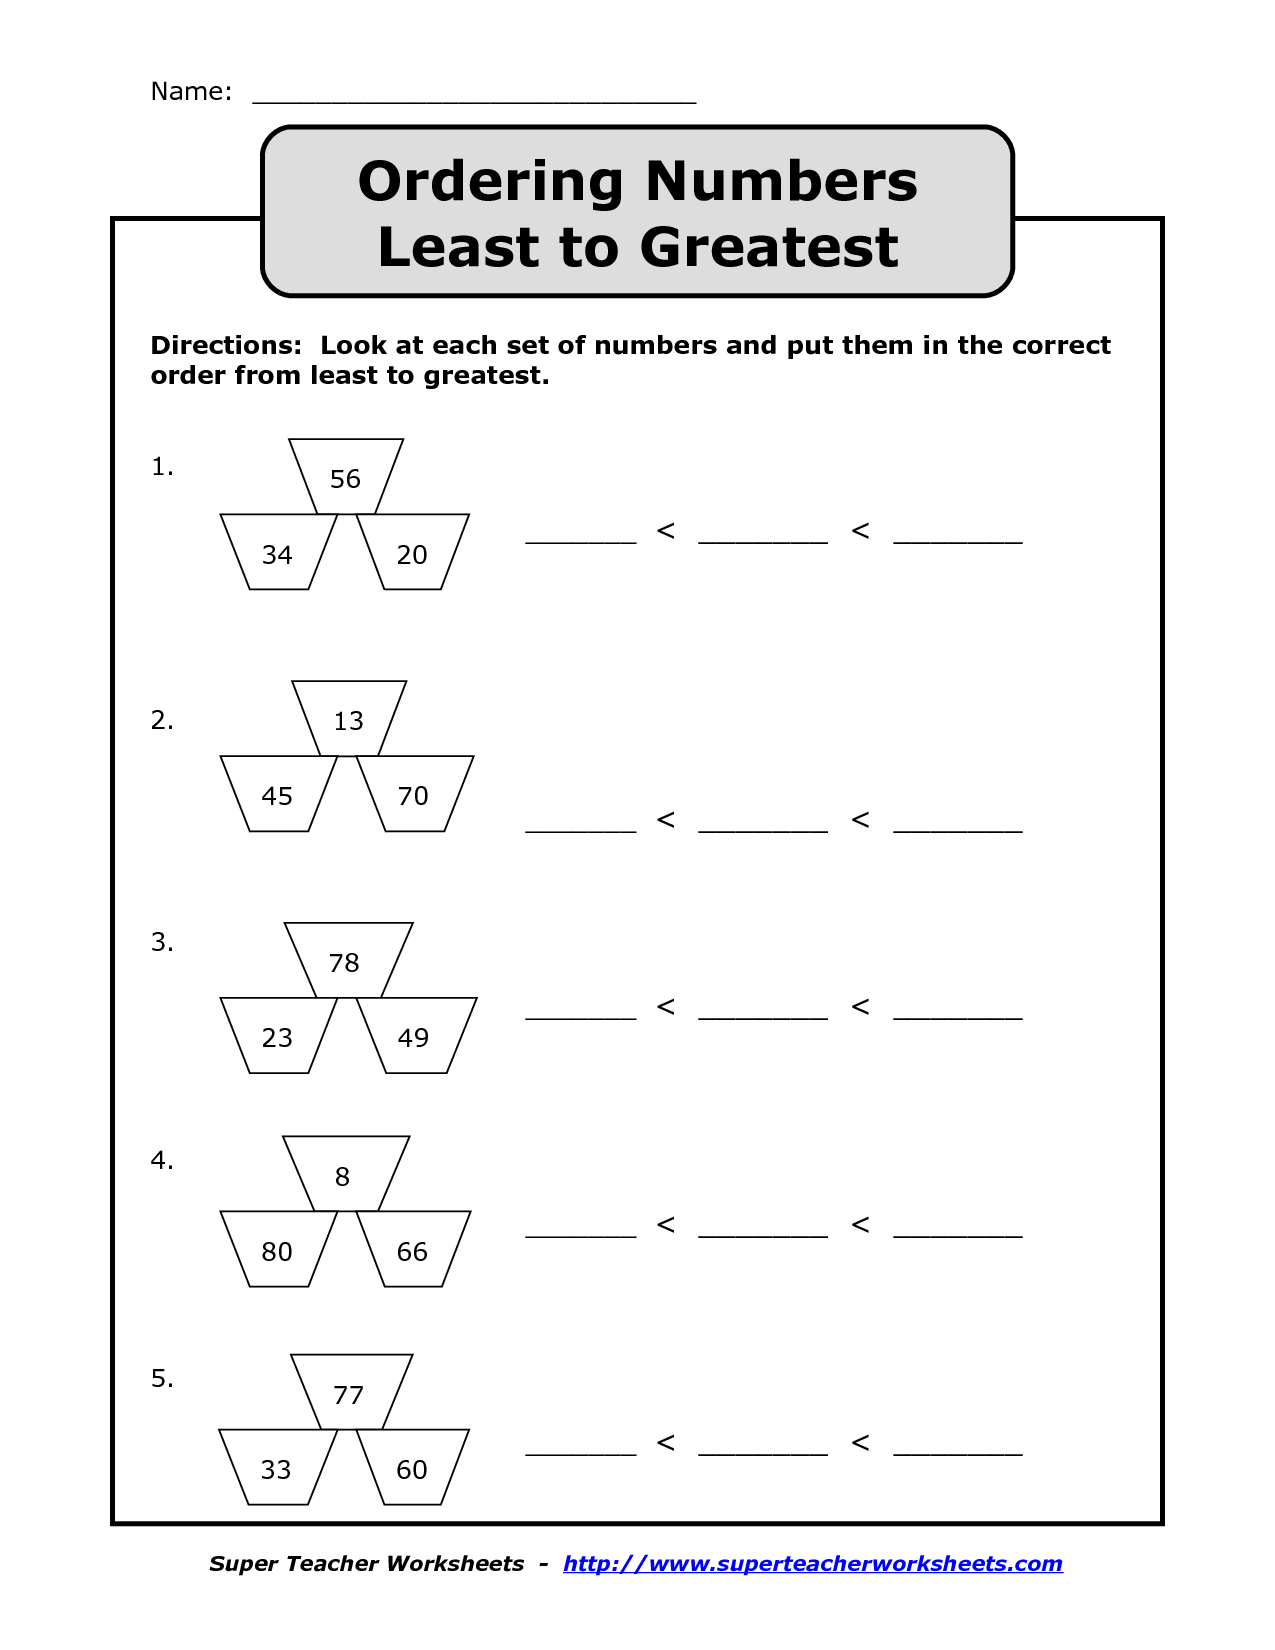 6-best-images-of-number-order-least-to-greatest-worksheets-numbers